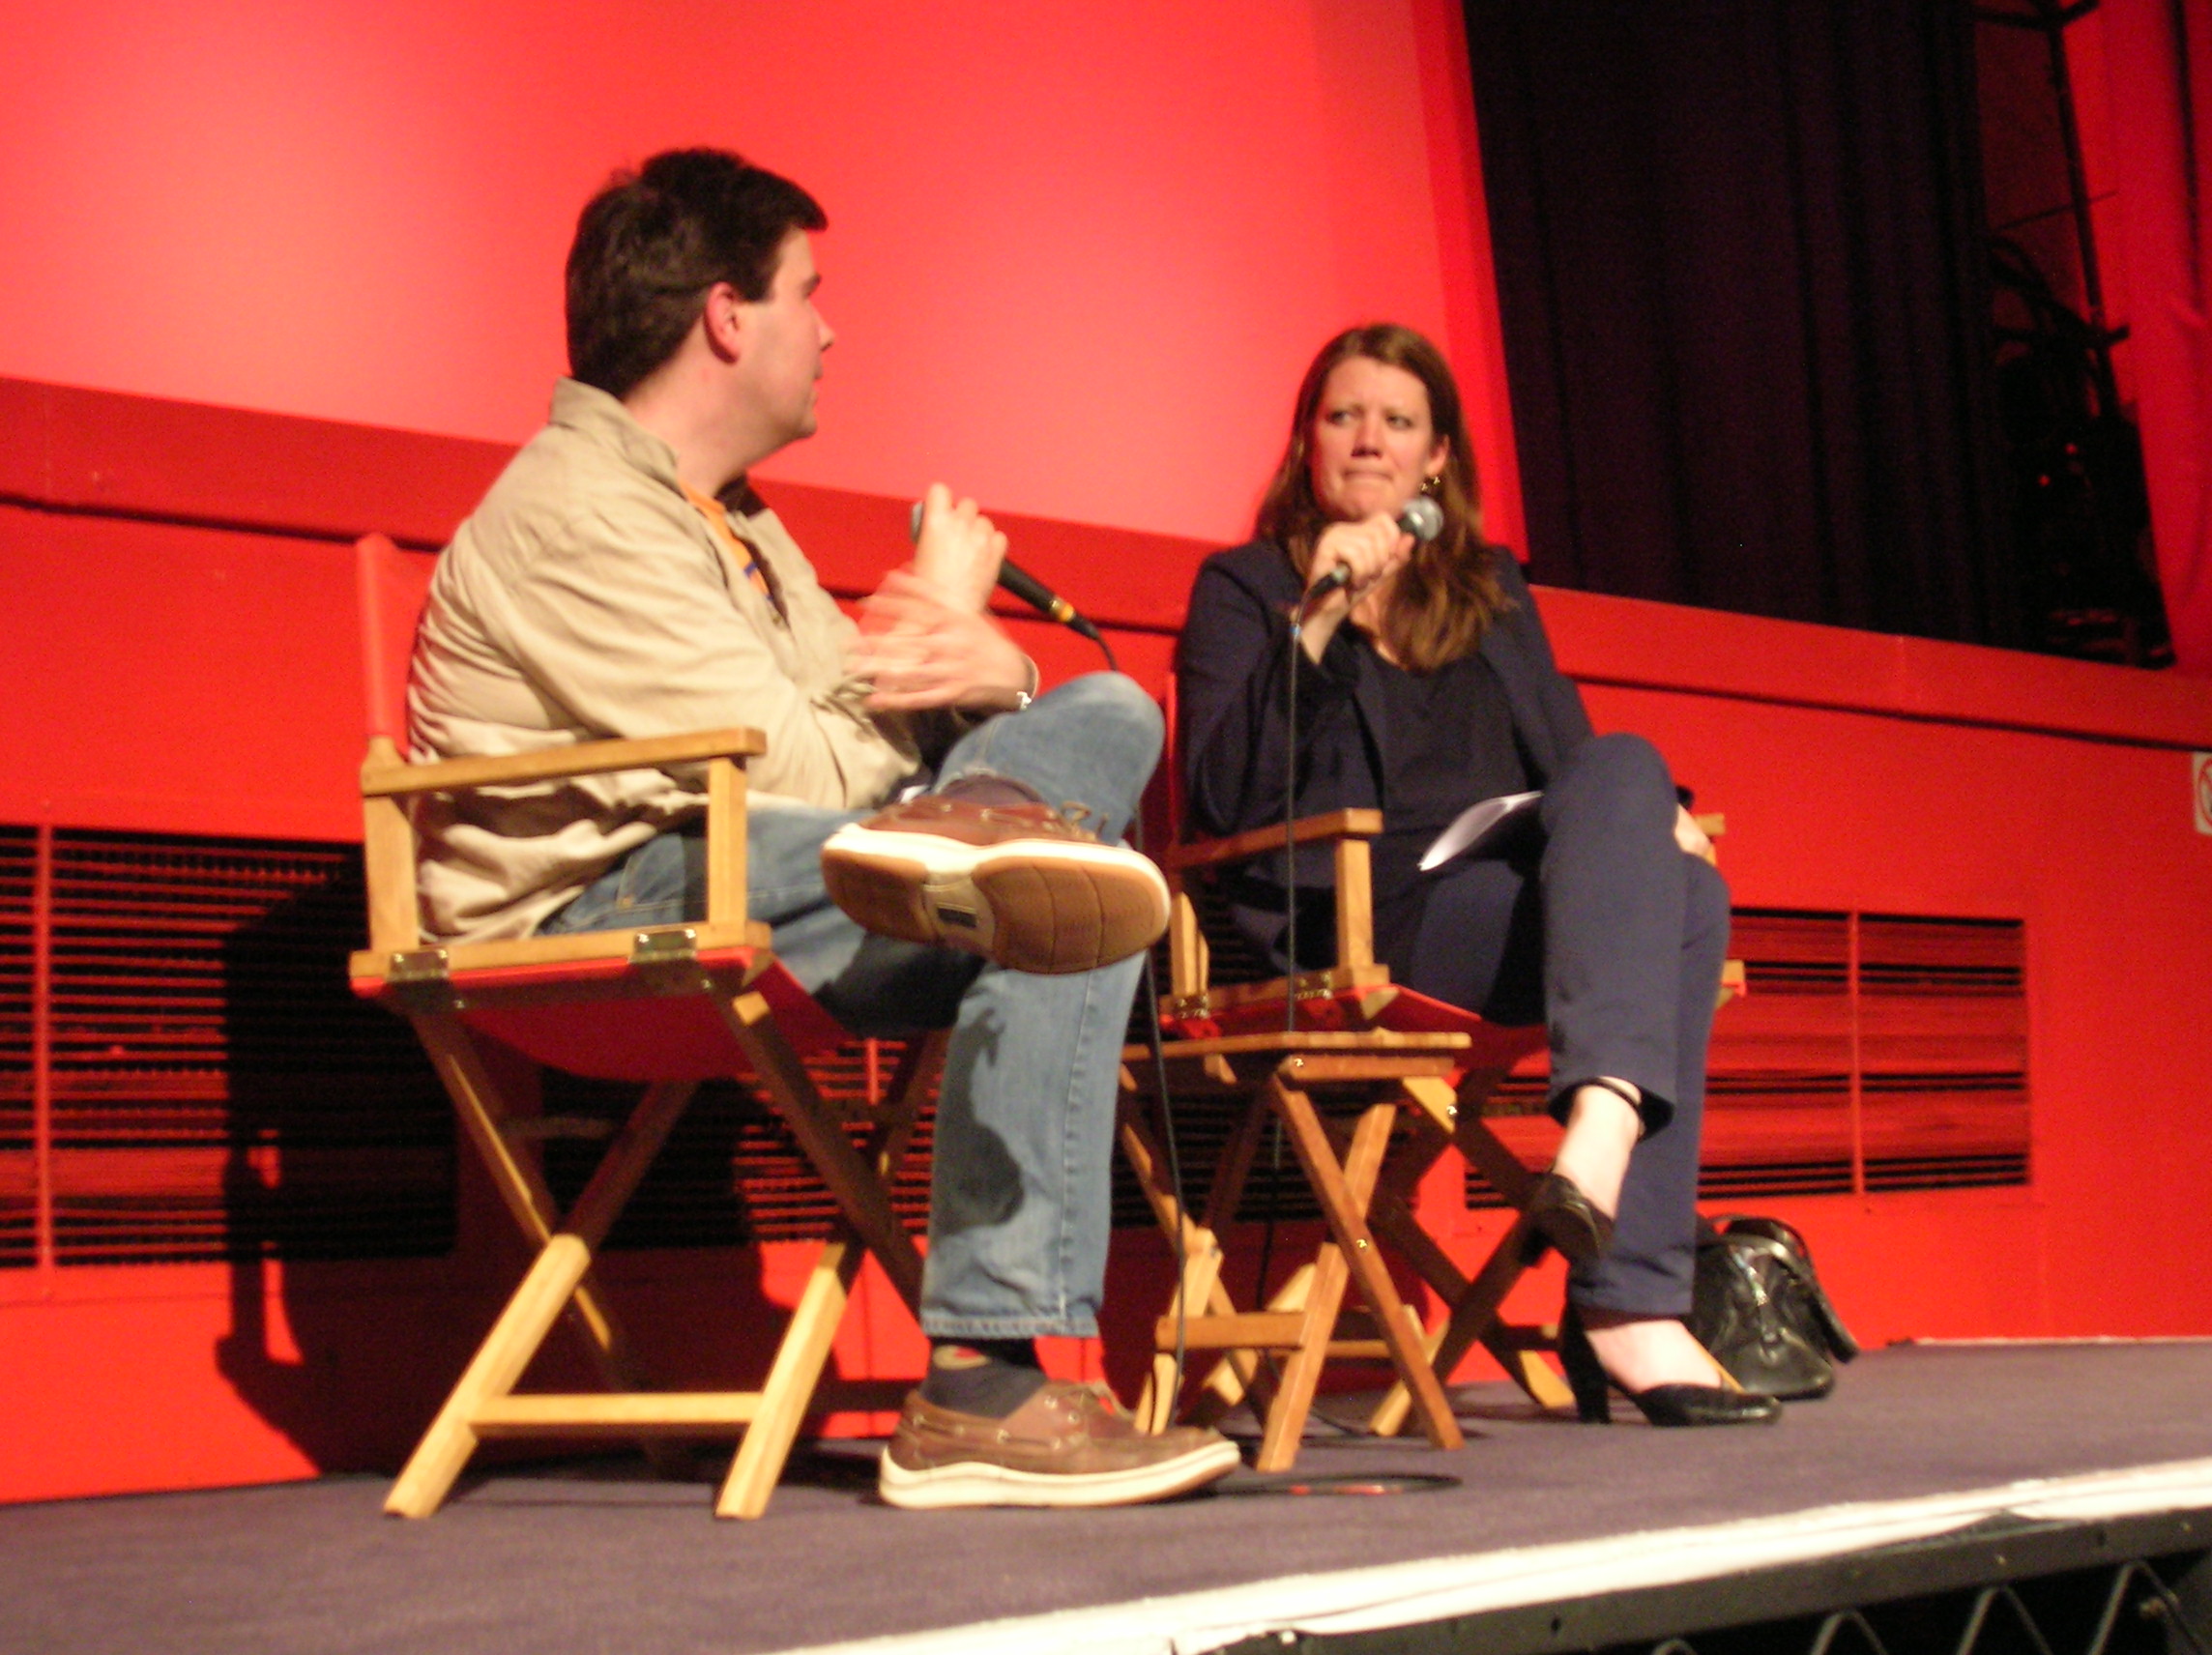 Alex Fitch talks to Hannah Patterson about Zoo at the Prince Charles Cinema, photo by Robin Warren